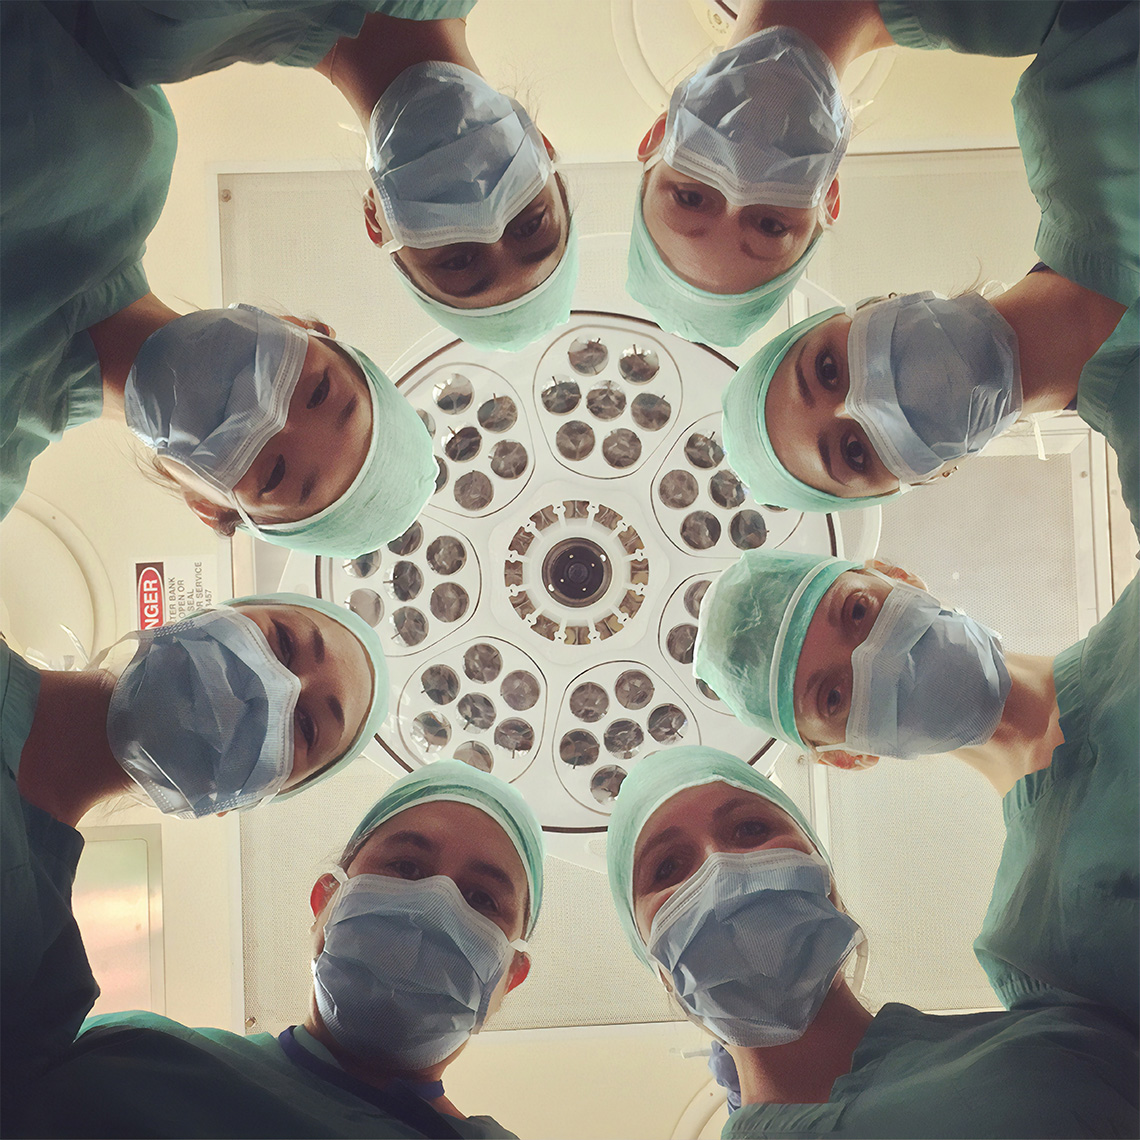 a group of physicians wearing scrubs in an OR looking down at the camera